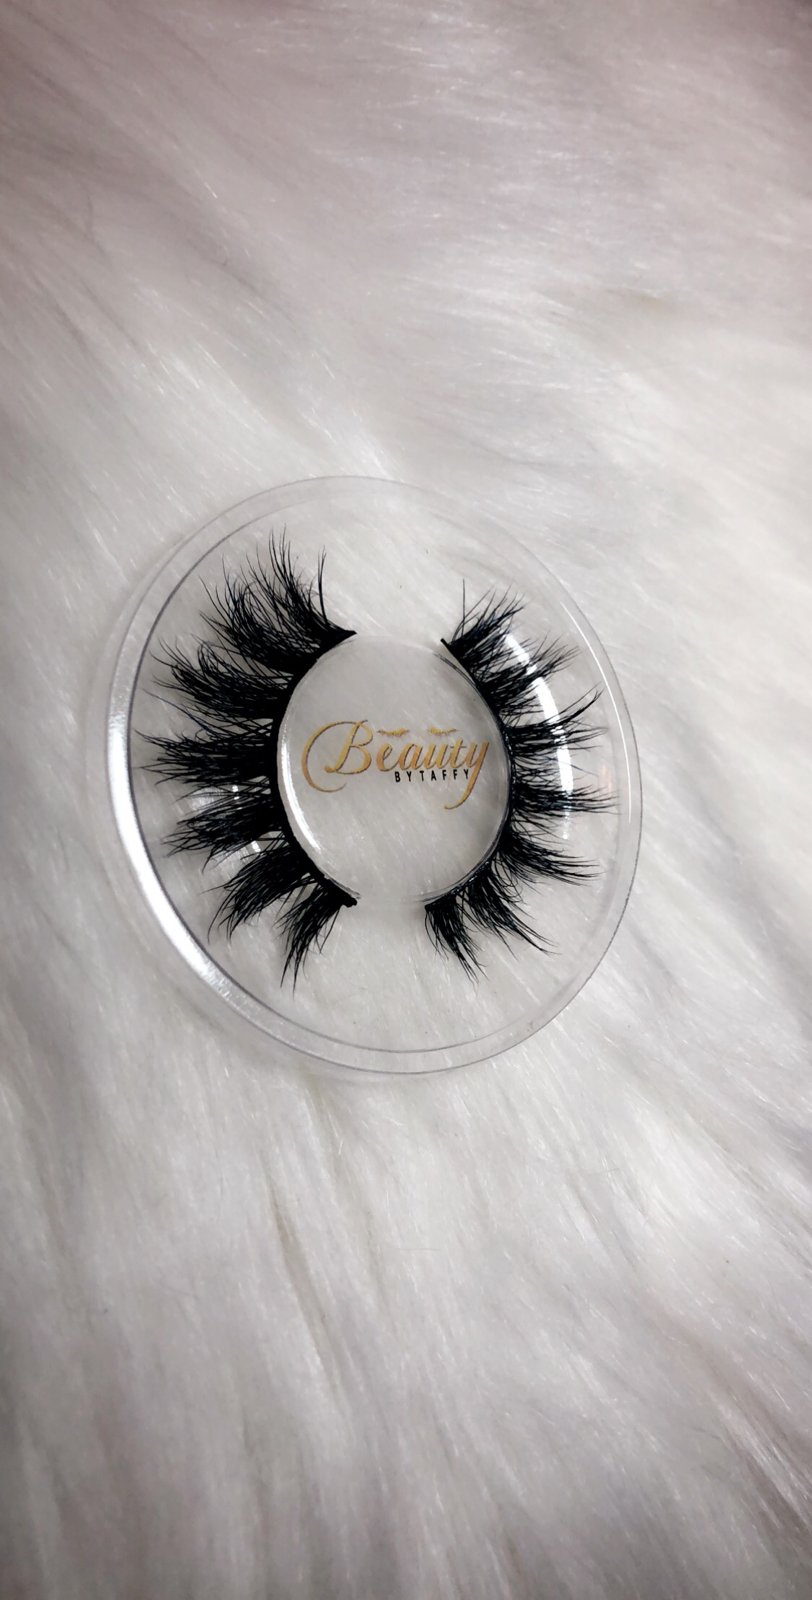 Image of "Pure" Siberian Mink Lashes